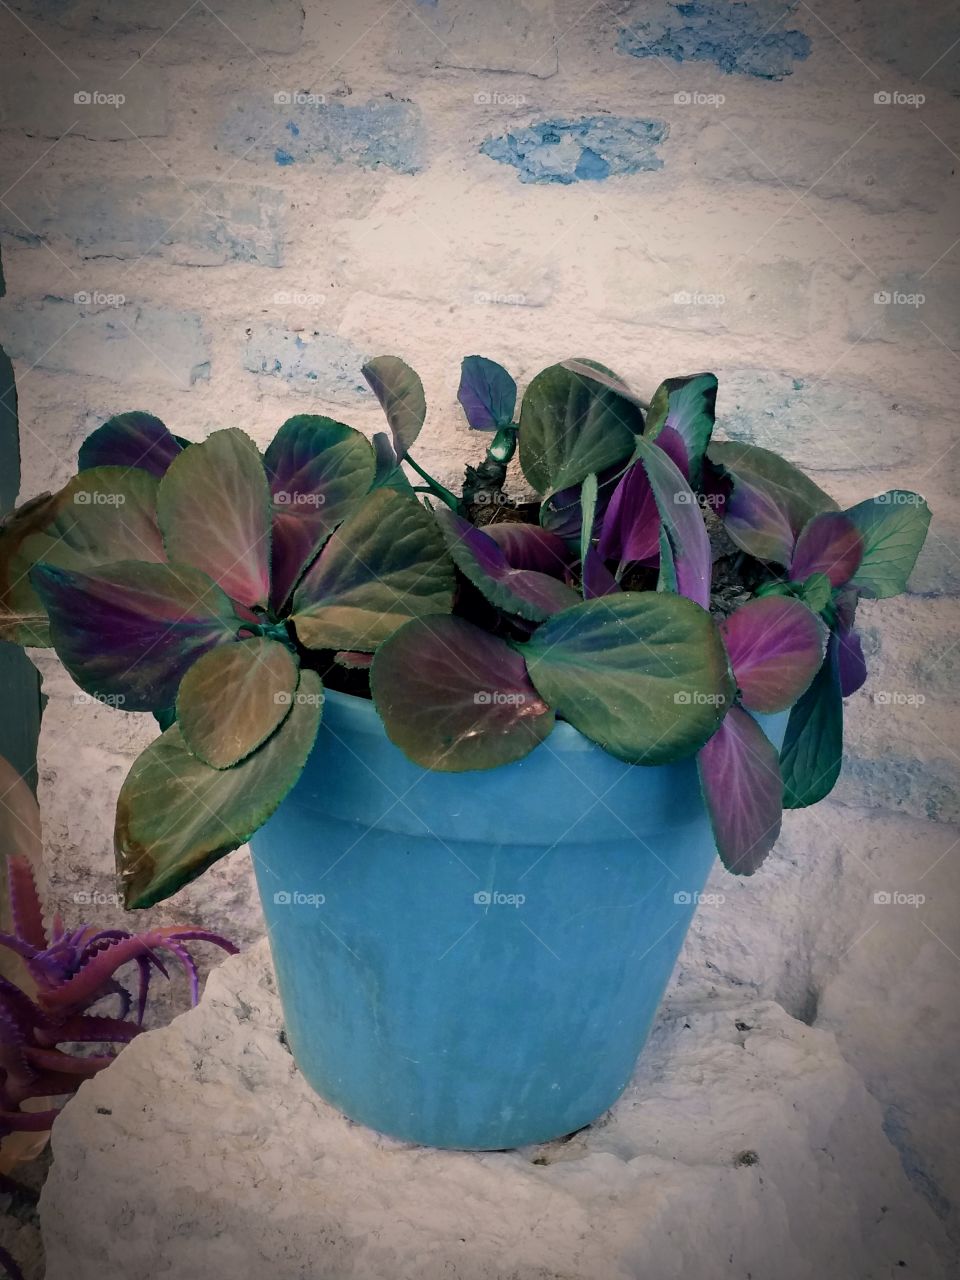 rustic potted plant